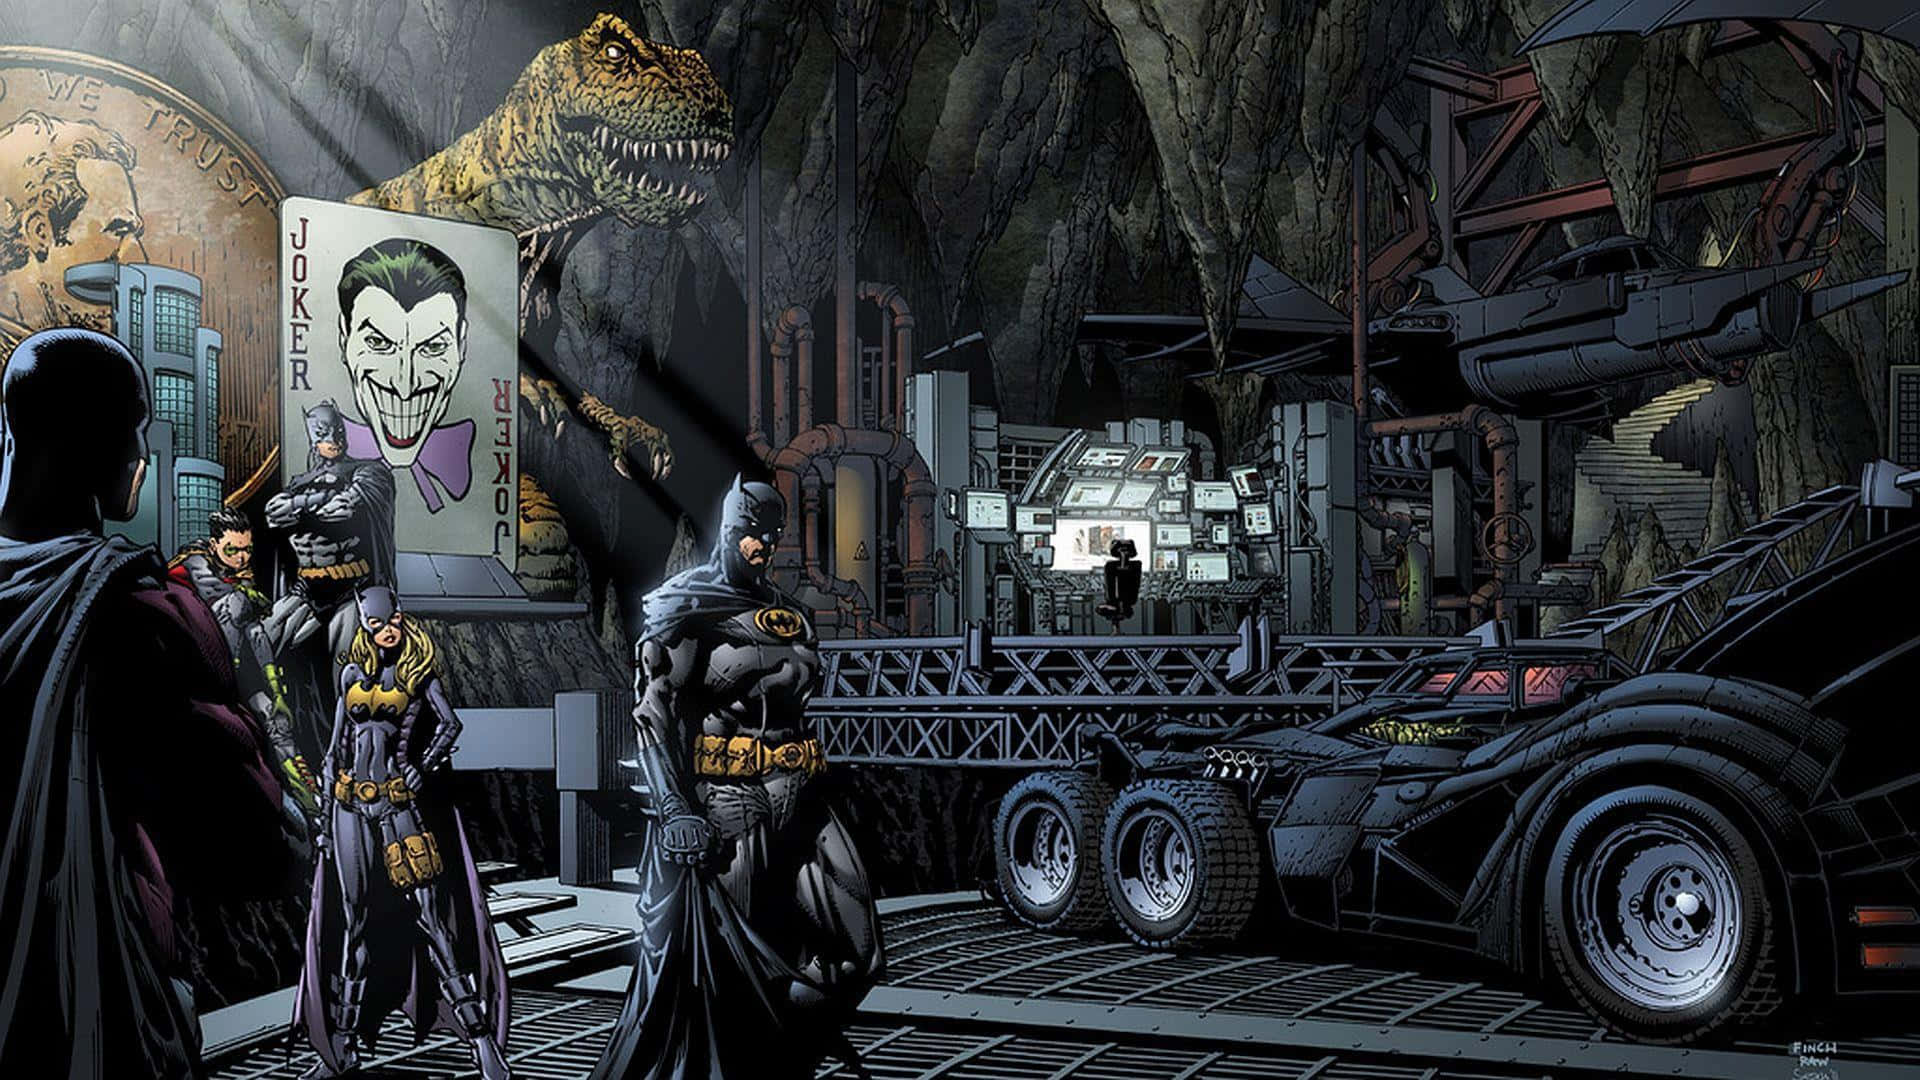 "The Dark Knight's Mysterious Batcave" Wallpaper